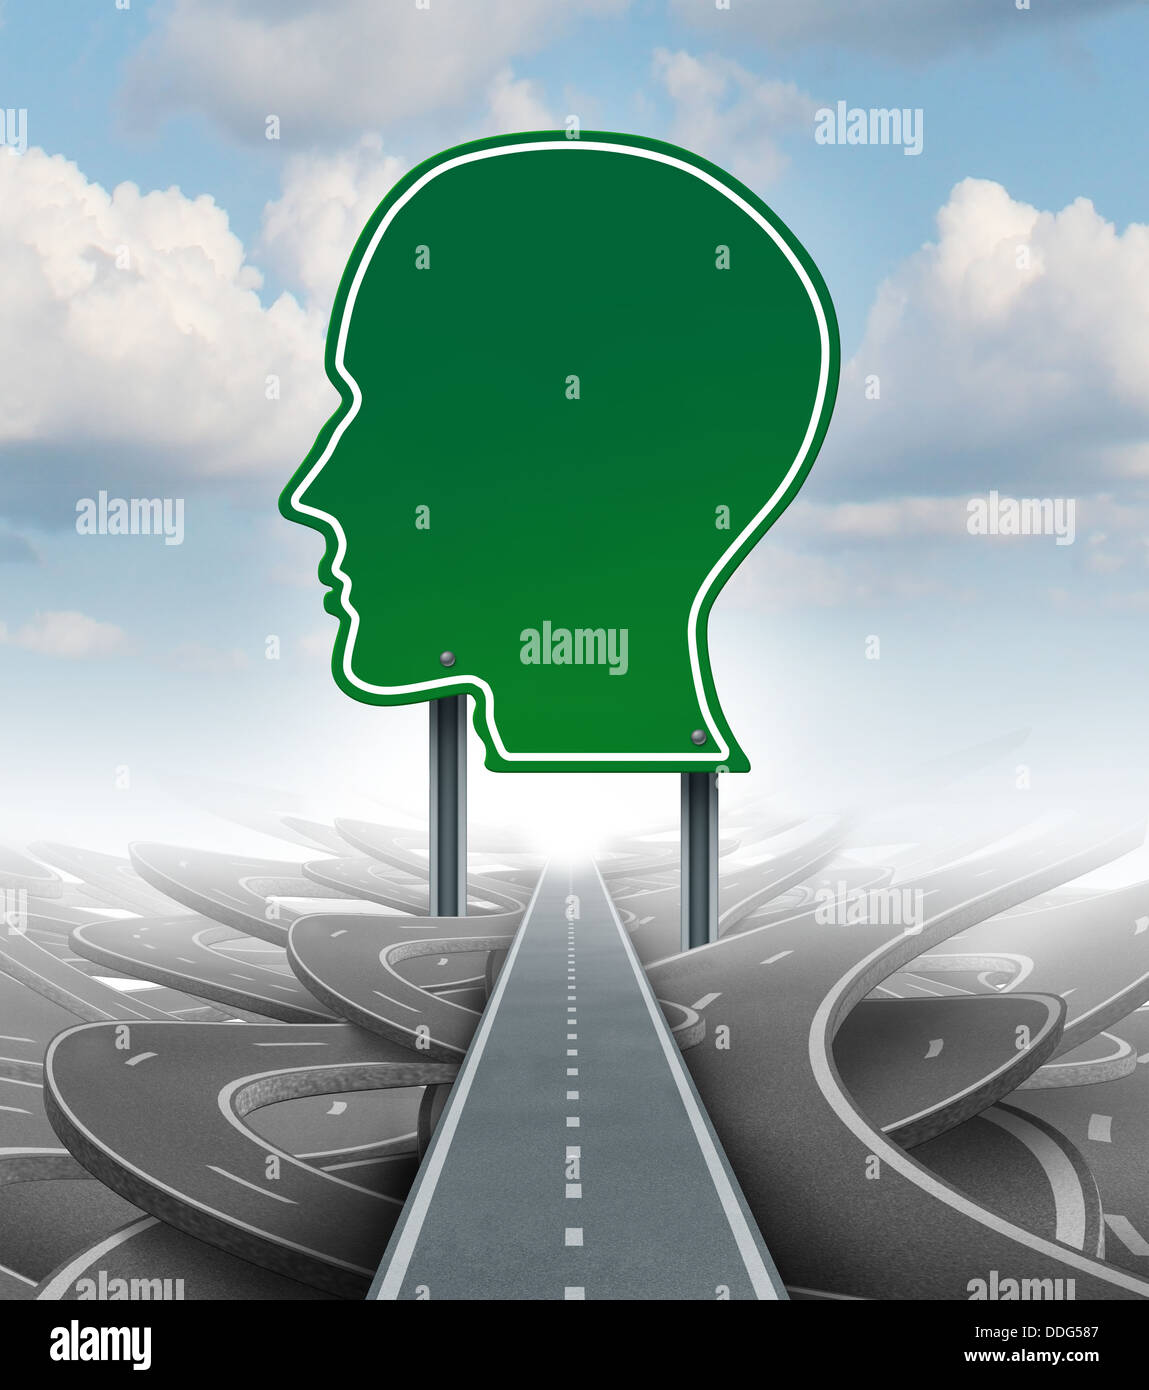 Strategic direction leadership business concept with a green road or highway sign in the shape of a human head as an icon of breaking out from a confusion of tangled roads with a clear plan for a personal success path. Stock Photo